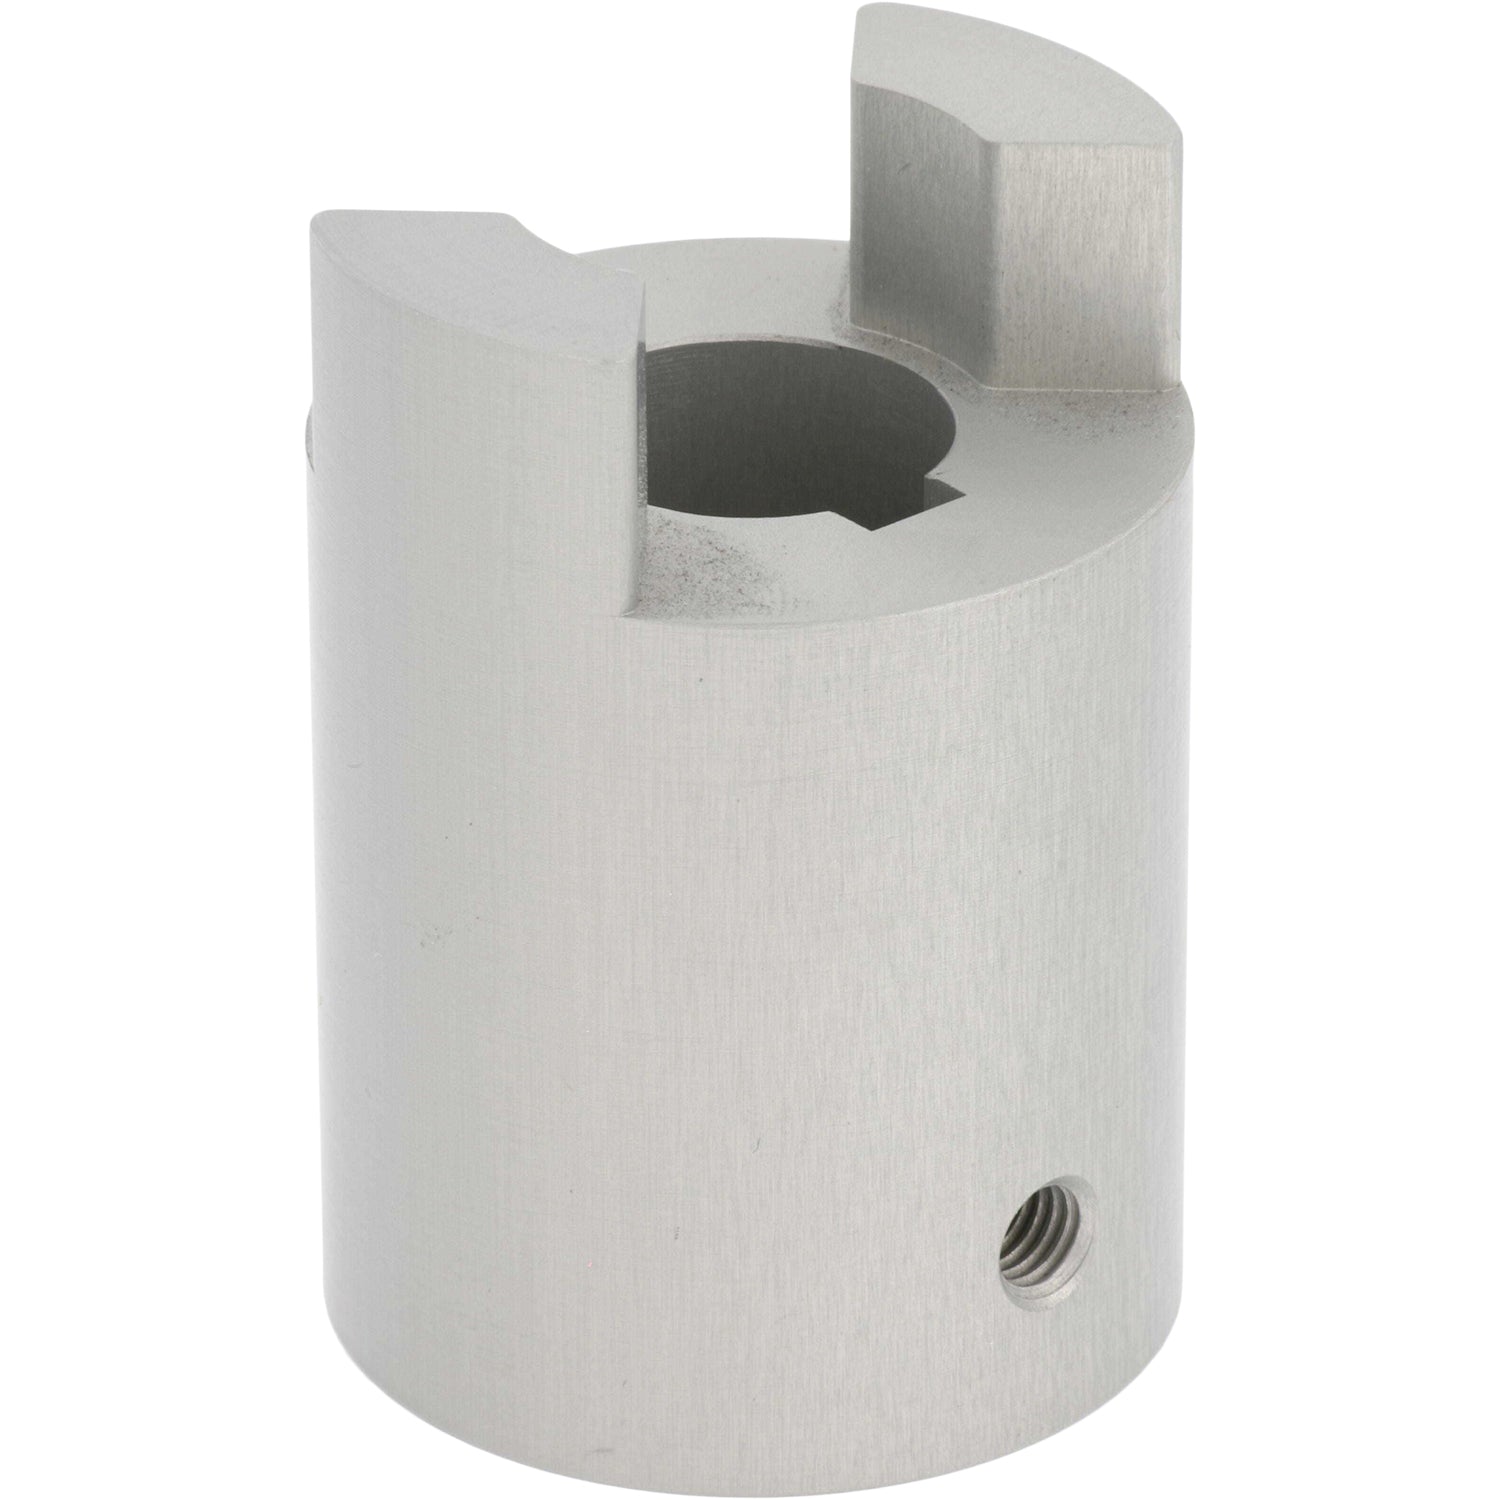 Hard anodized aluminum motor coupler with threaded hole on side. Part shown on white background. 